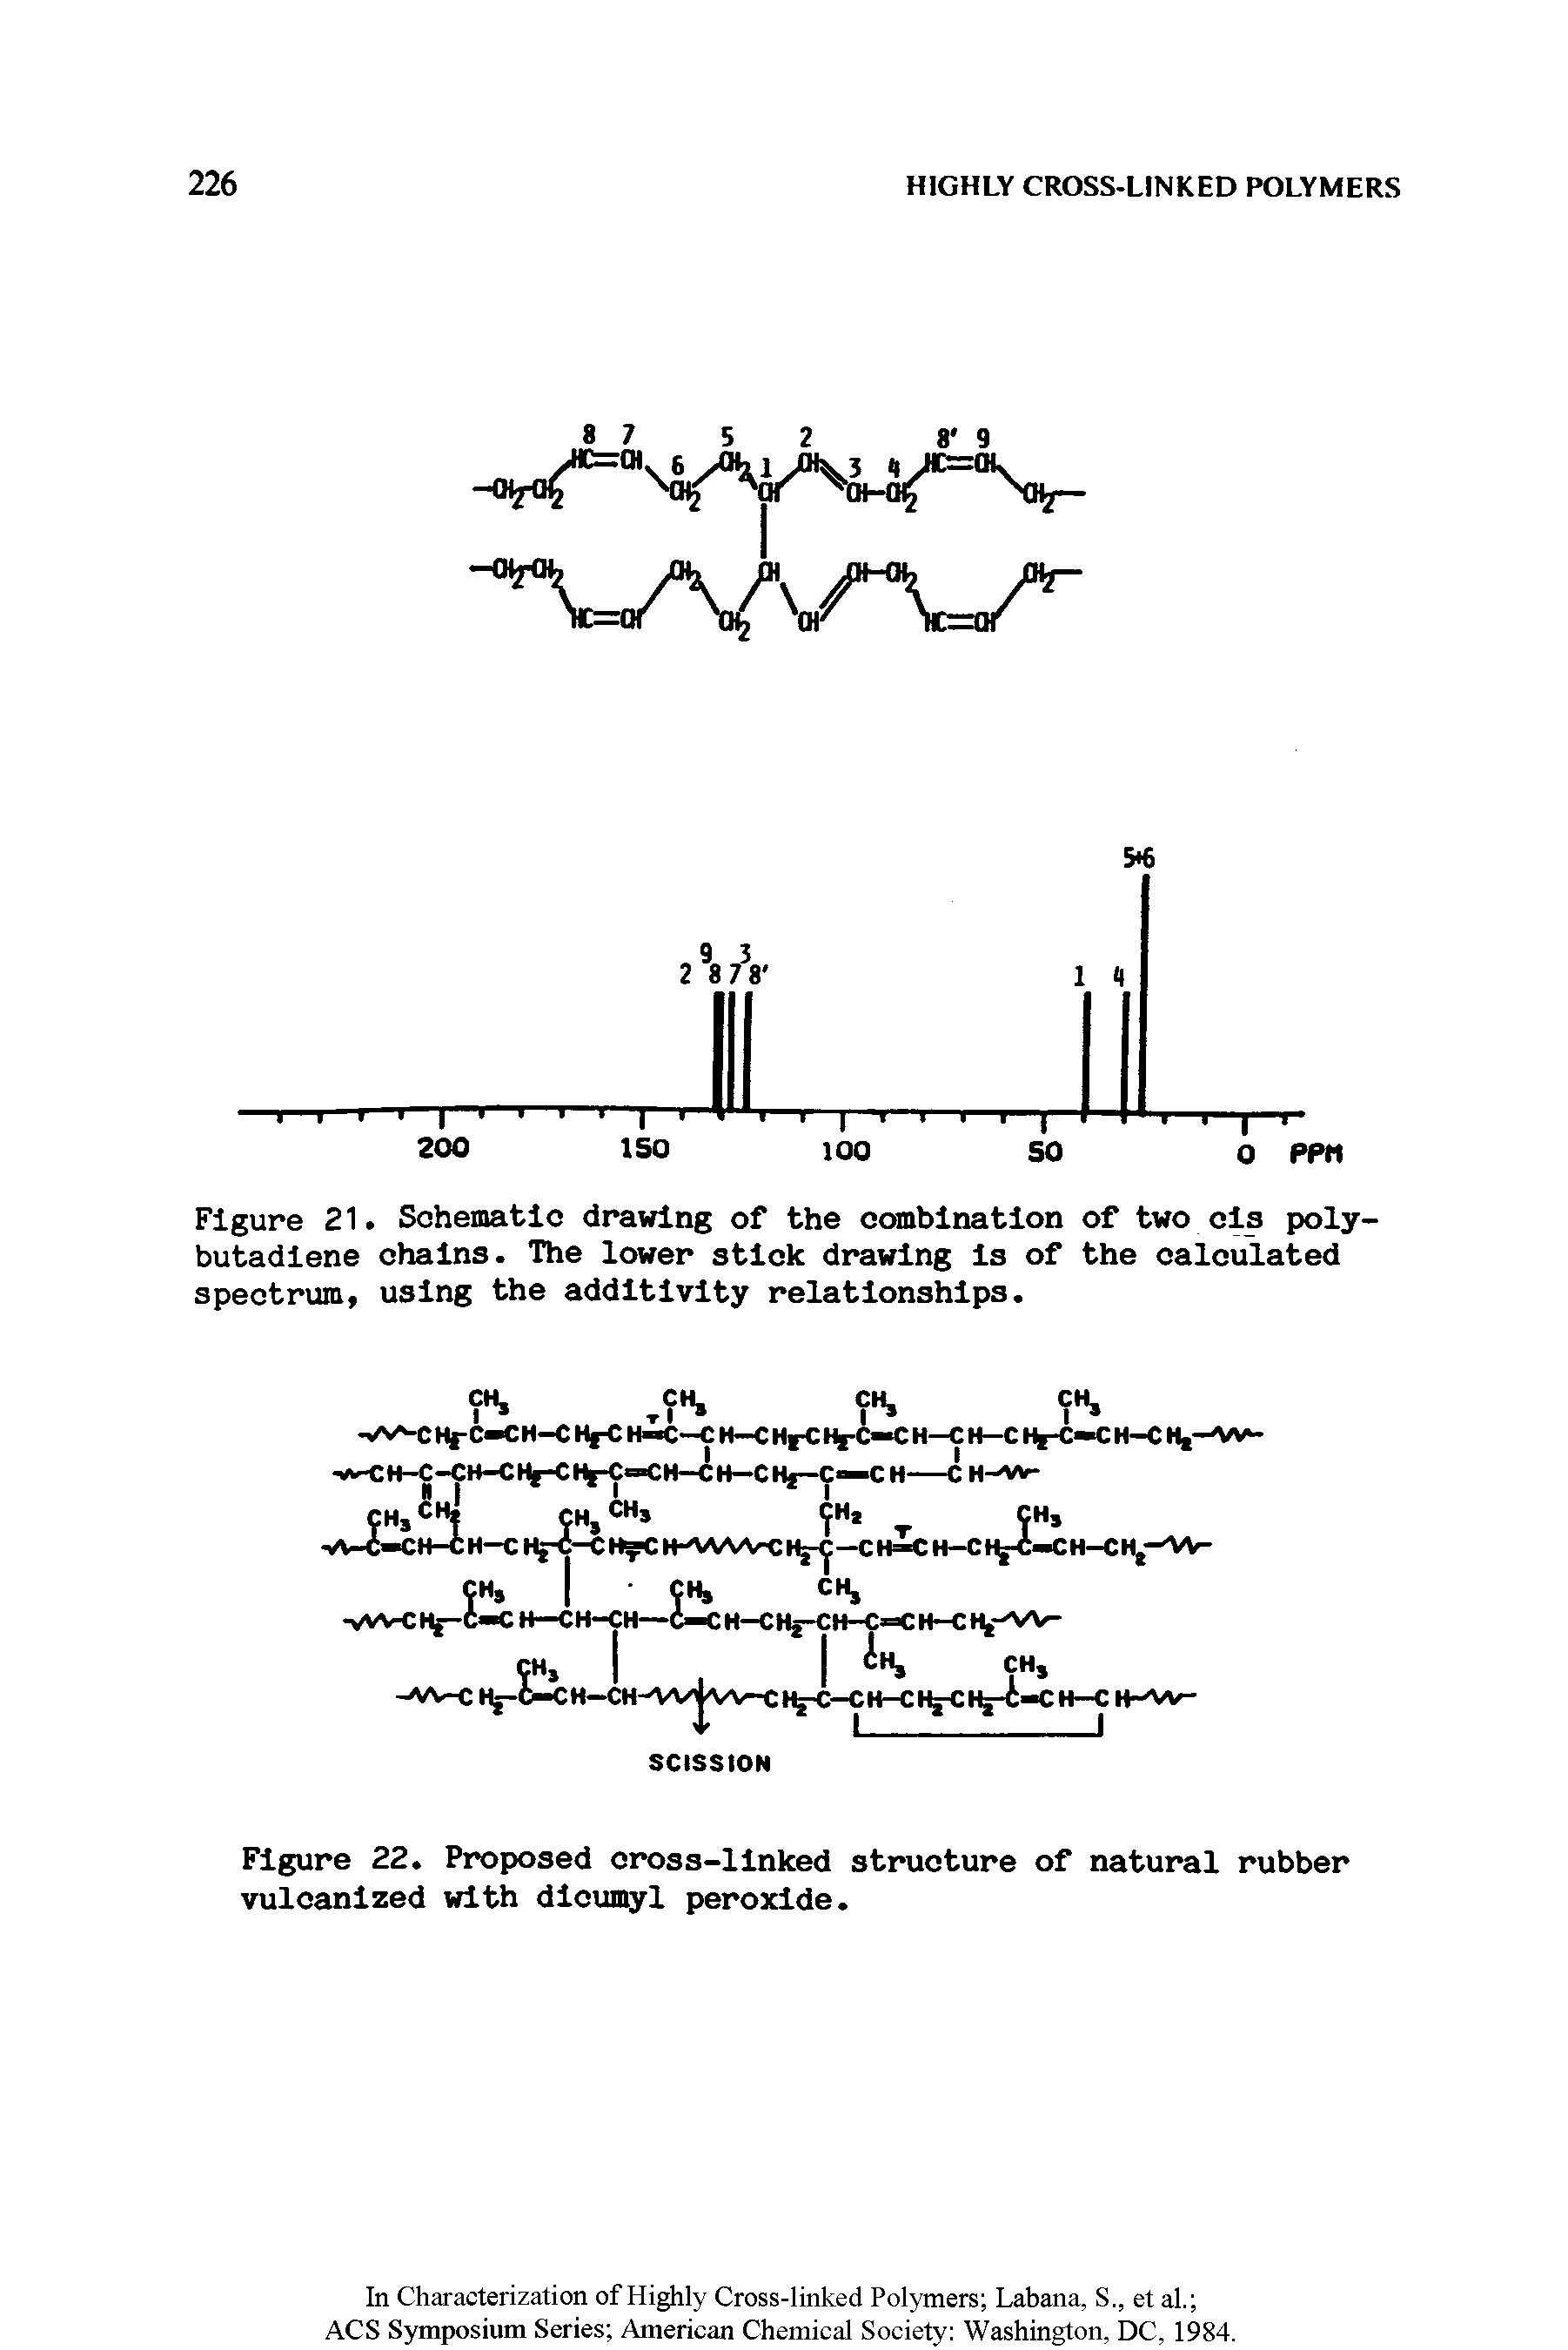 Figure 22. Proposed cross-linked structure of natural rubber vulcanized with dlcumyl peroxide.